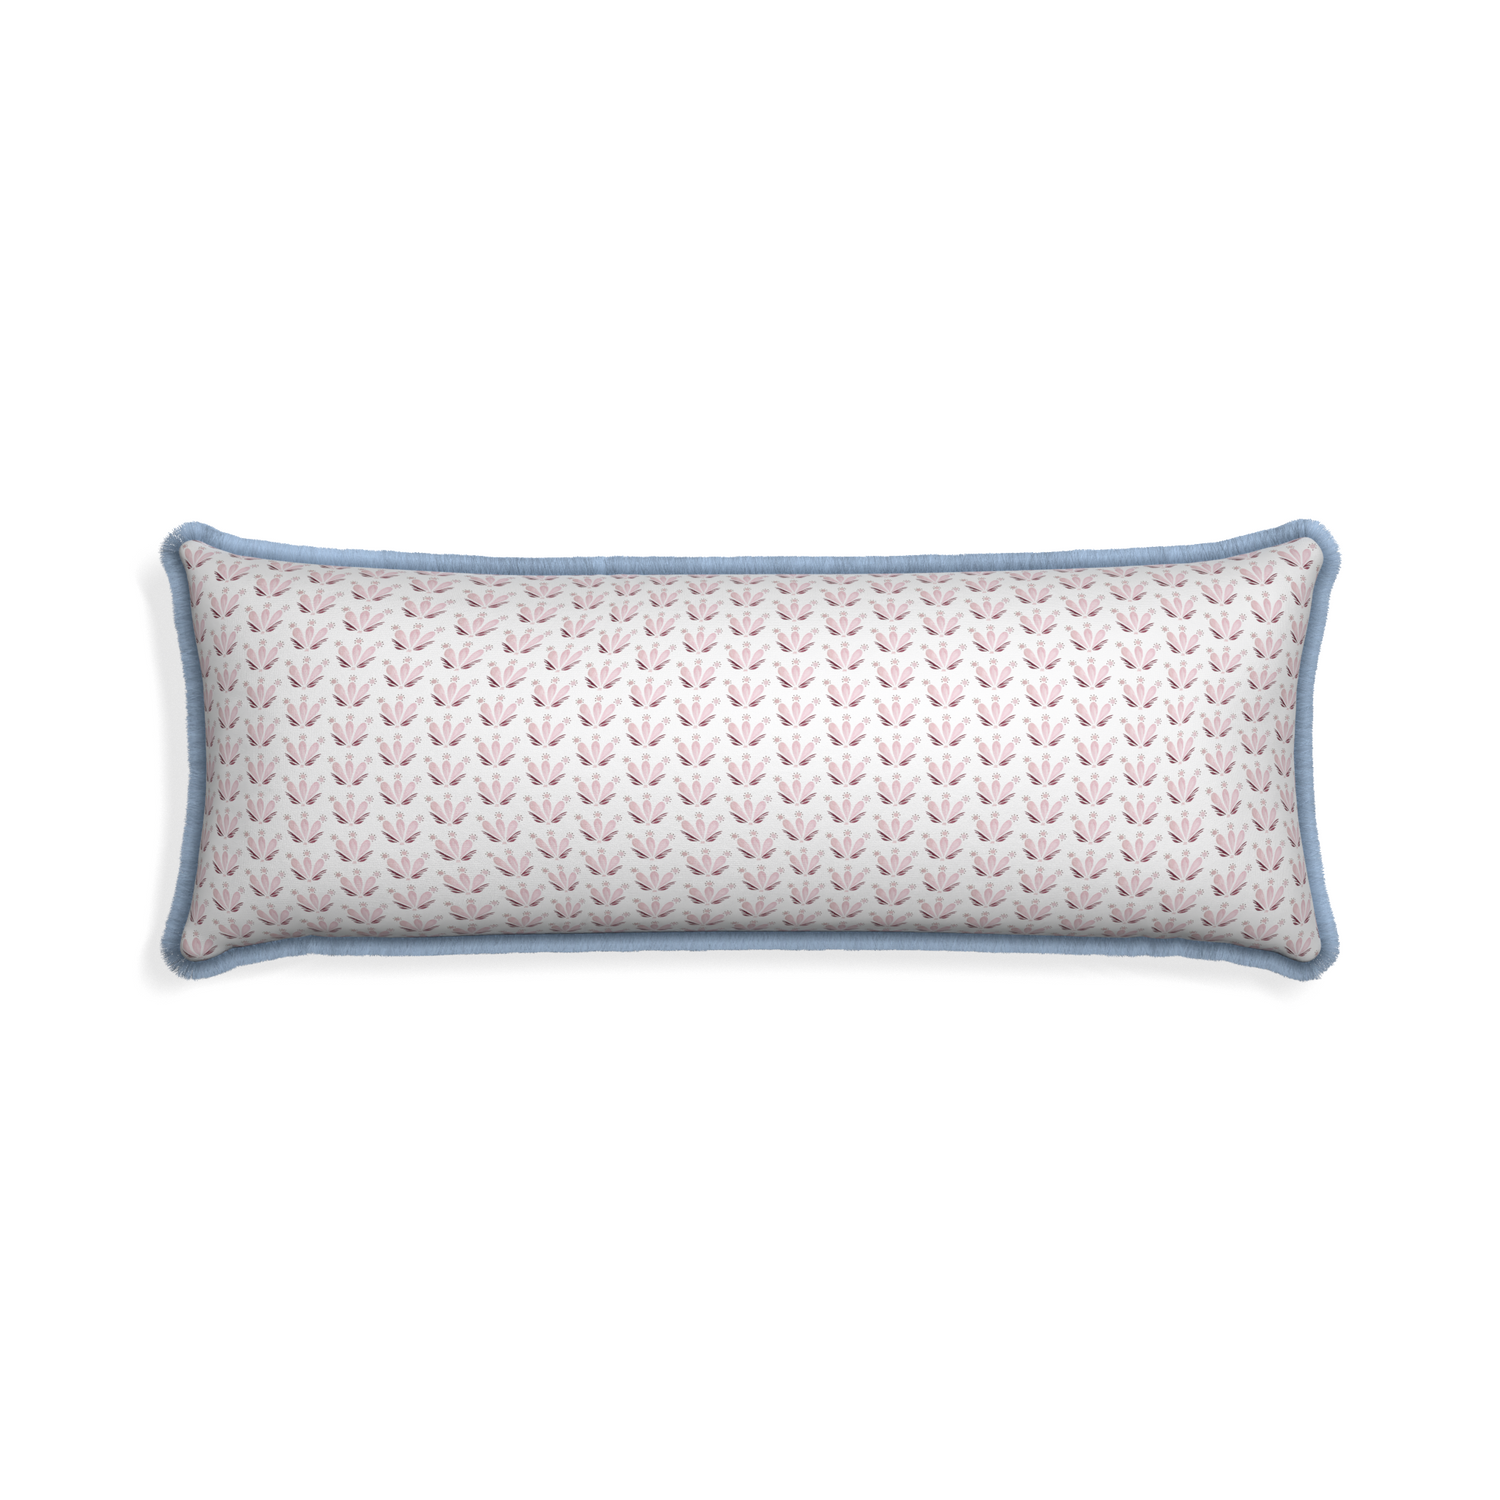 Xl-lumbar serena pink custom pillow with sky fringe on white background